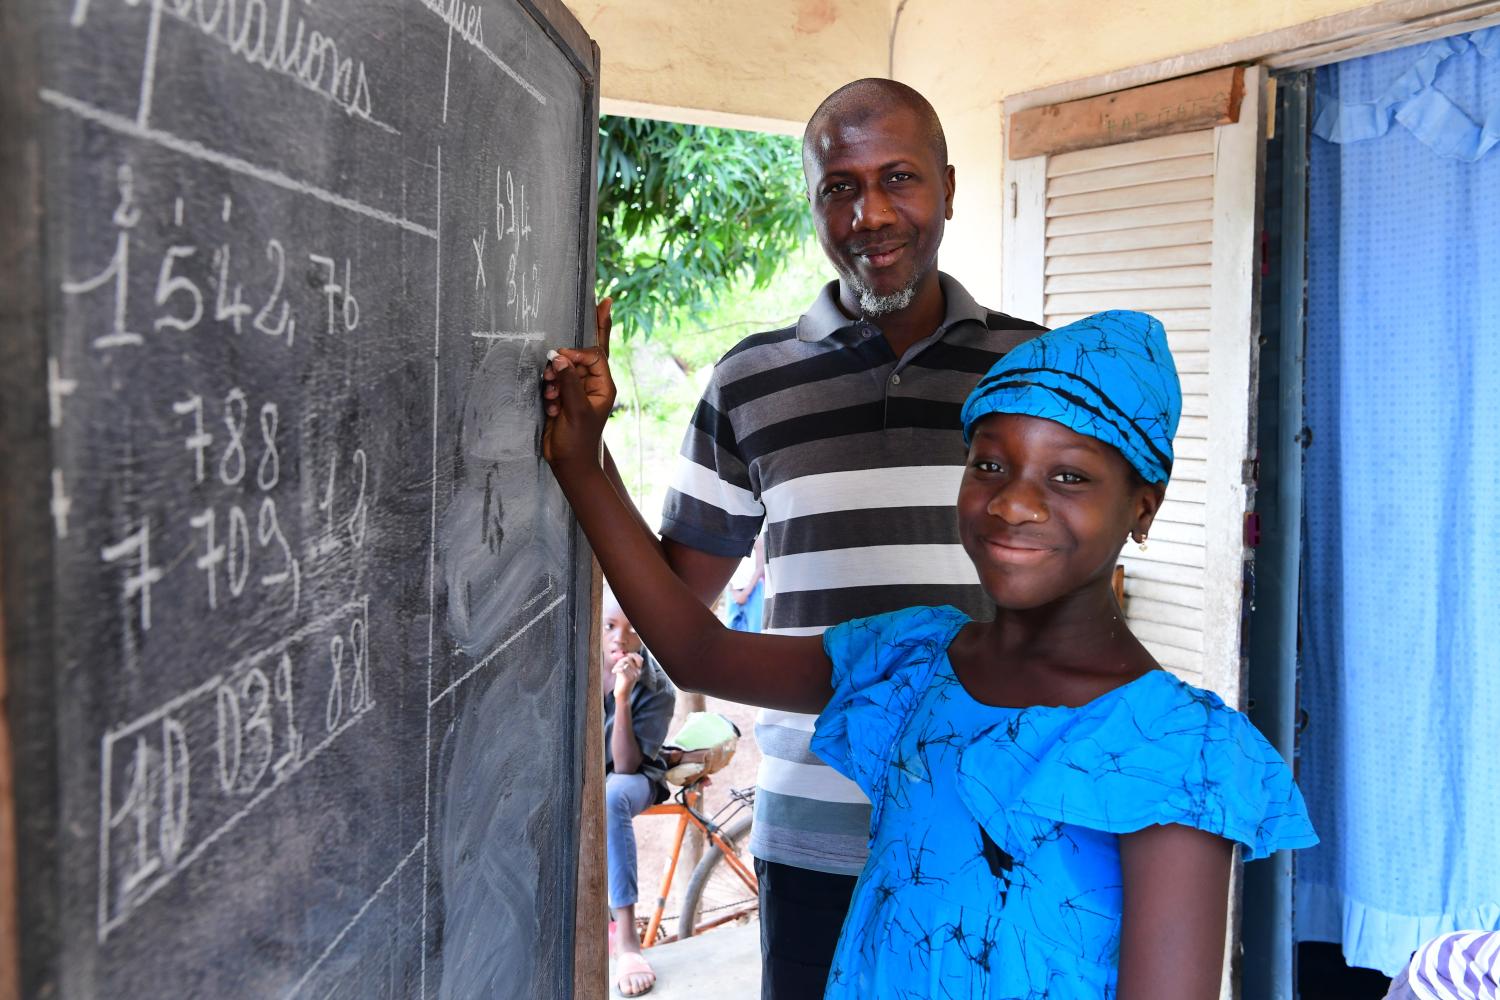 Fatimata Bagayogo, a 11 years old girl, is studying at home during the corona crisis, in Odienné, in the North of Côte d'Ivoire. As schools are closed, she's attending classes on television and also practicing on a billboard her father bought. Sidiki Bagayogo, a 47 years old men is a teacher, and knows the importance of education. "I like my father helps me. He does not oblige me. I like to study and I miss school. I miss my friends but now I help my mother to cook when I'm bored. Later I want to become a doctor. " says the young girl. For every child, education.